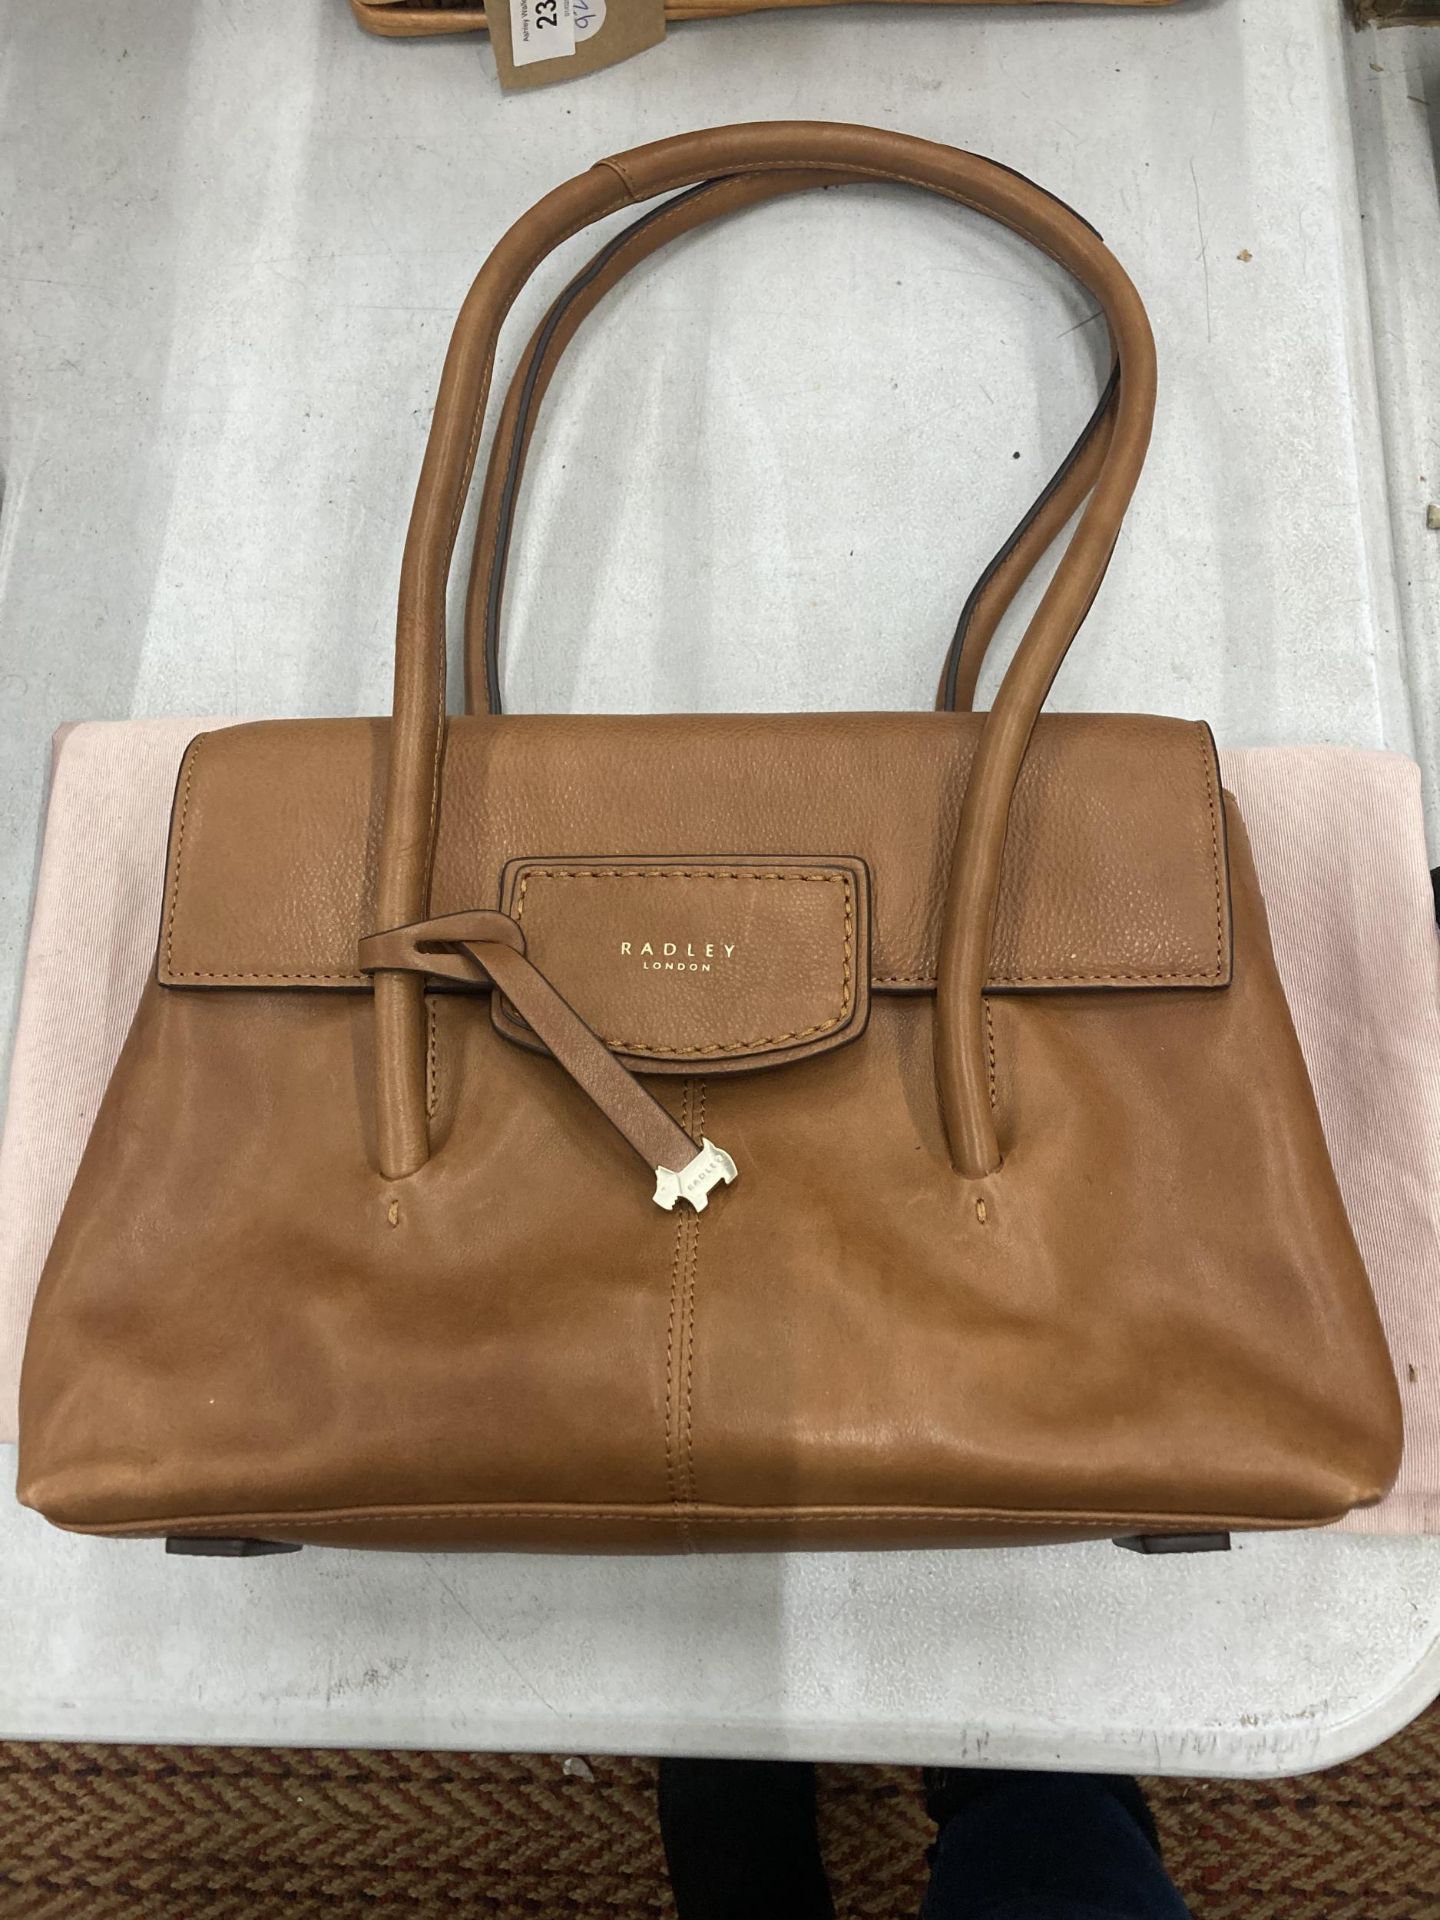 A VINTAGE TAN COLOURED RADLEY BAG WITH COVER